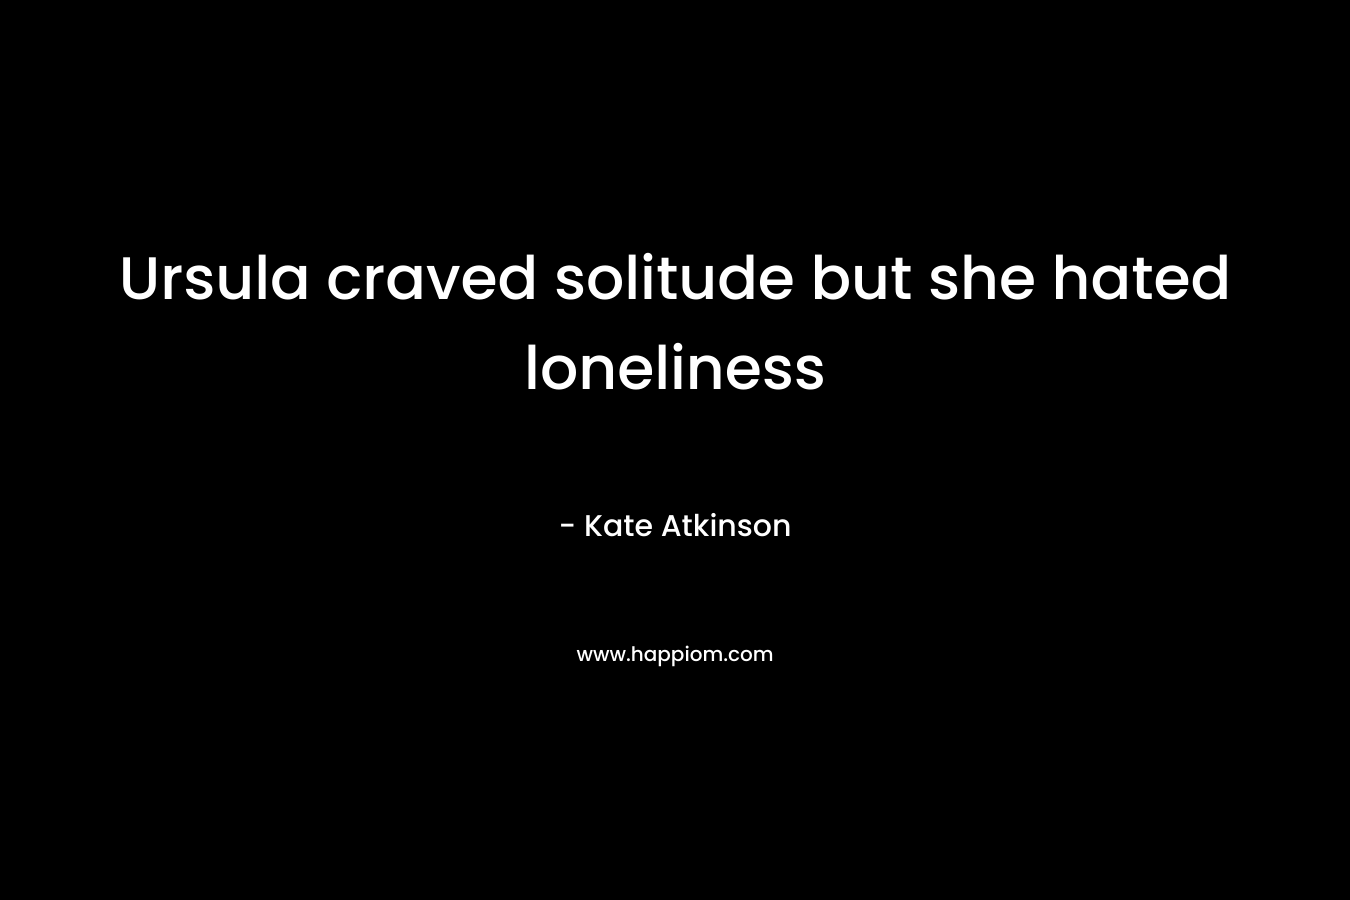 Ursula craved solitude but she hated loneliness – Kate Atkinson